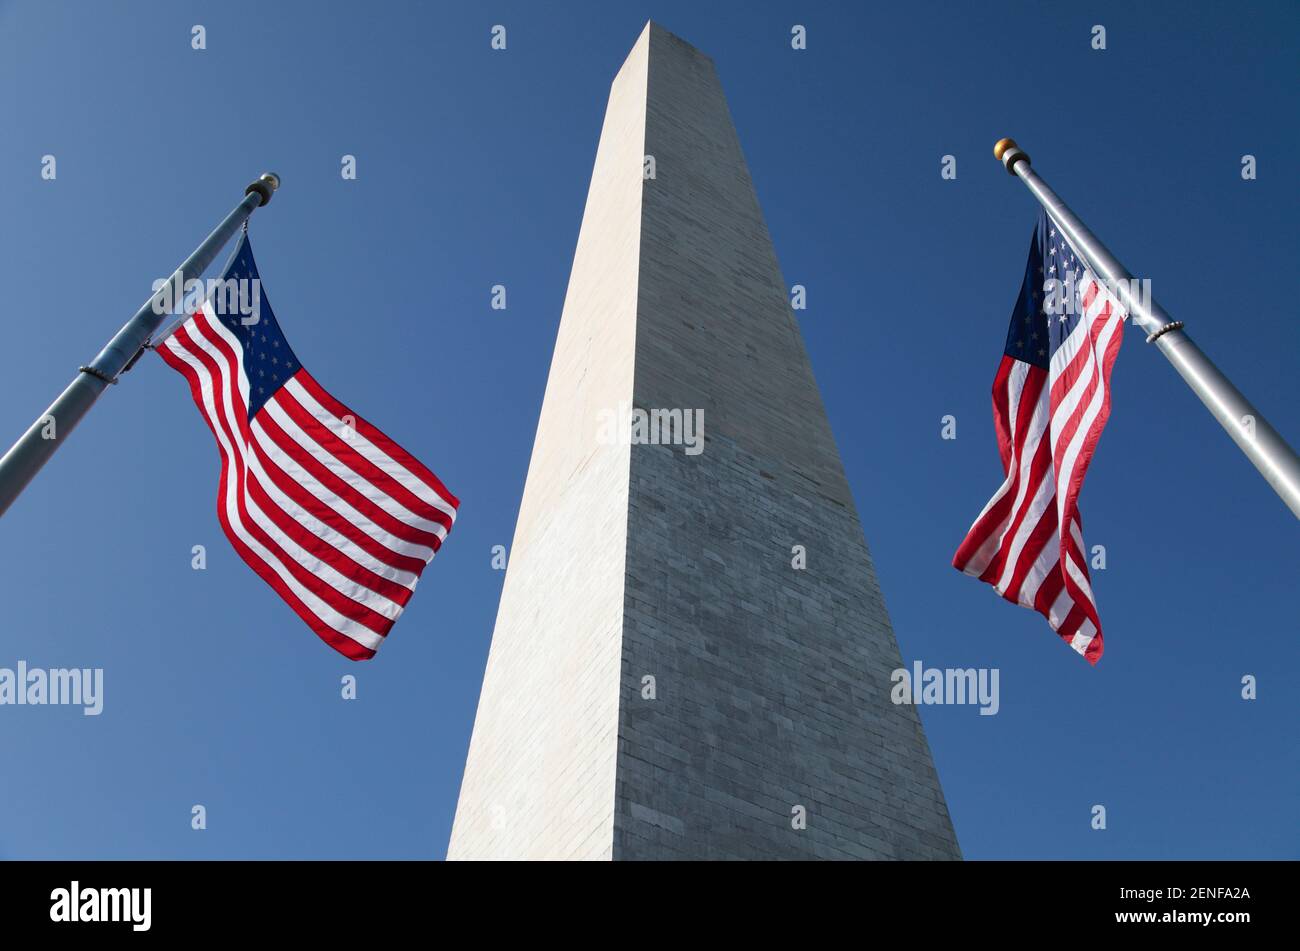 USA Flag and George Washington Monument from National World War Two Memorial, The Mall, Washington D.C., United States of America. T Stock Photo